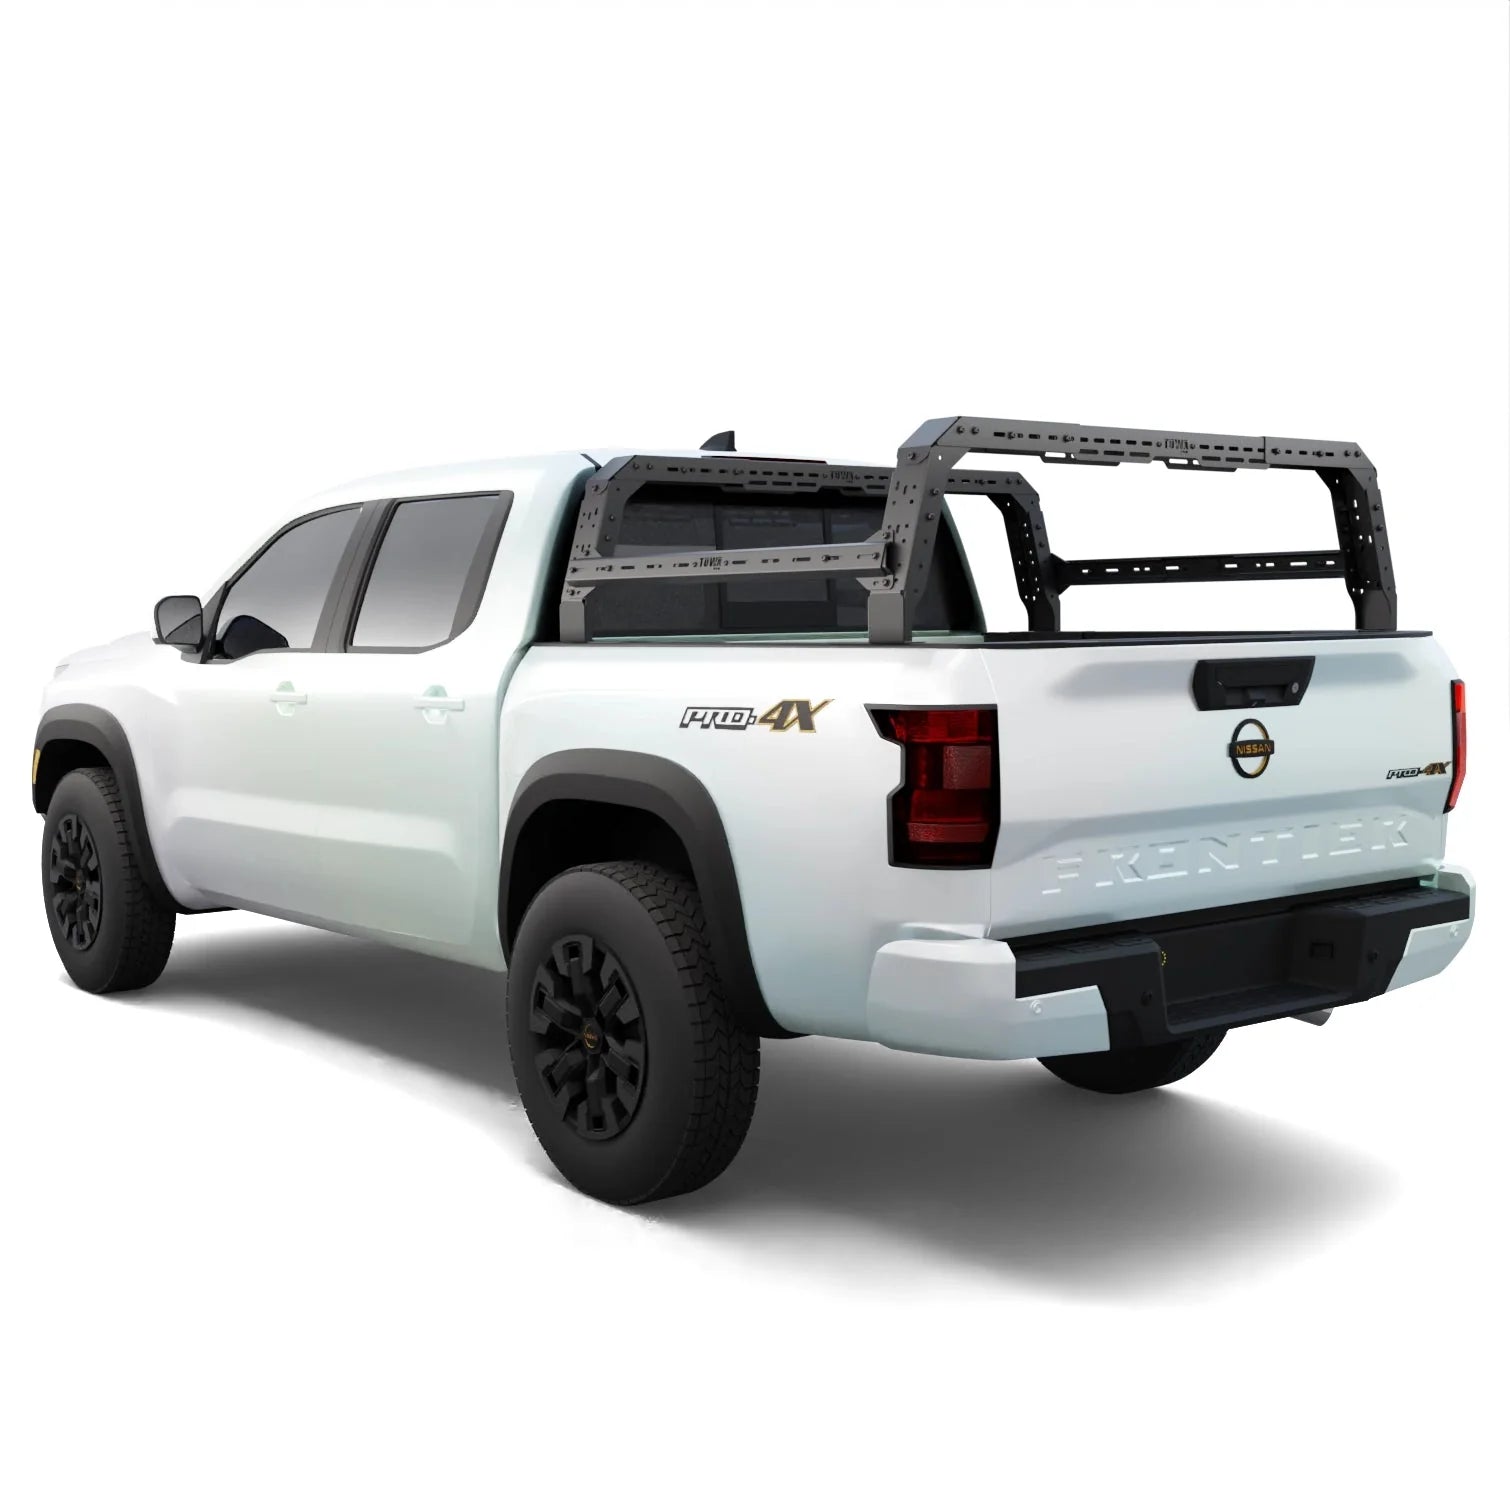 Nissan Frontier 4CX Series Shiprock Height Adjustable Bed Rack Truck Bed Cargo Rack System TUWA PRO®️ rear view installed on white background